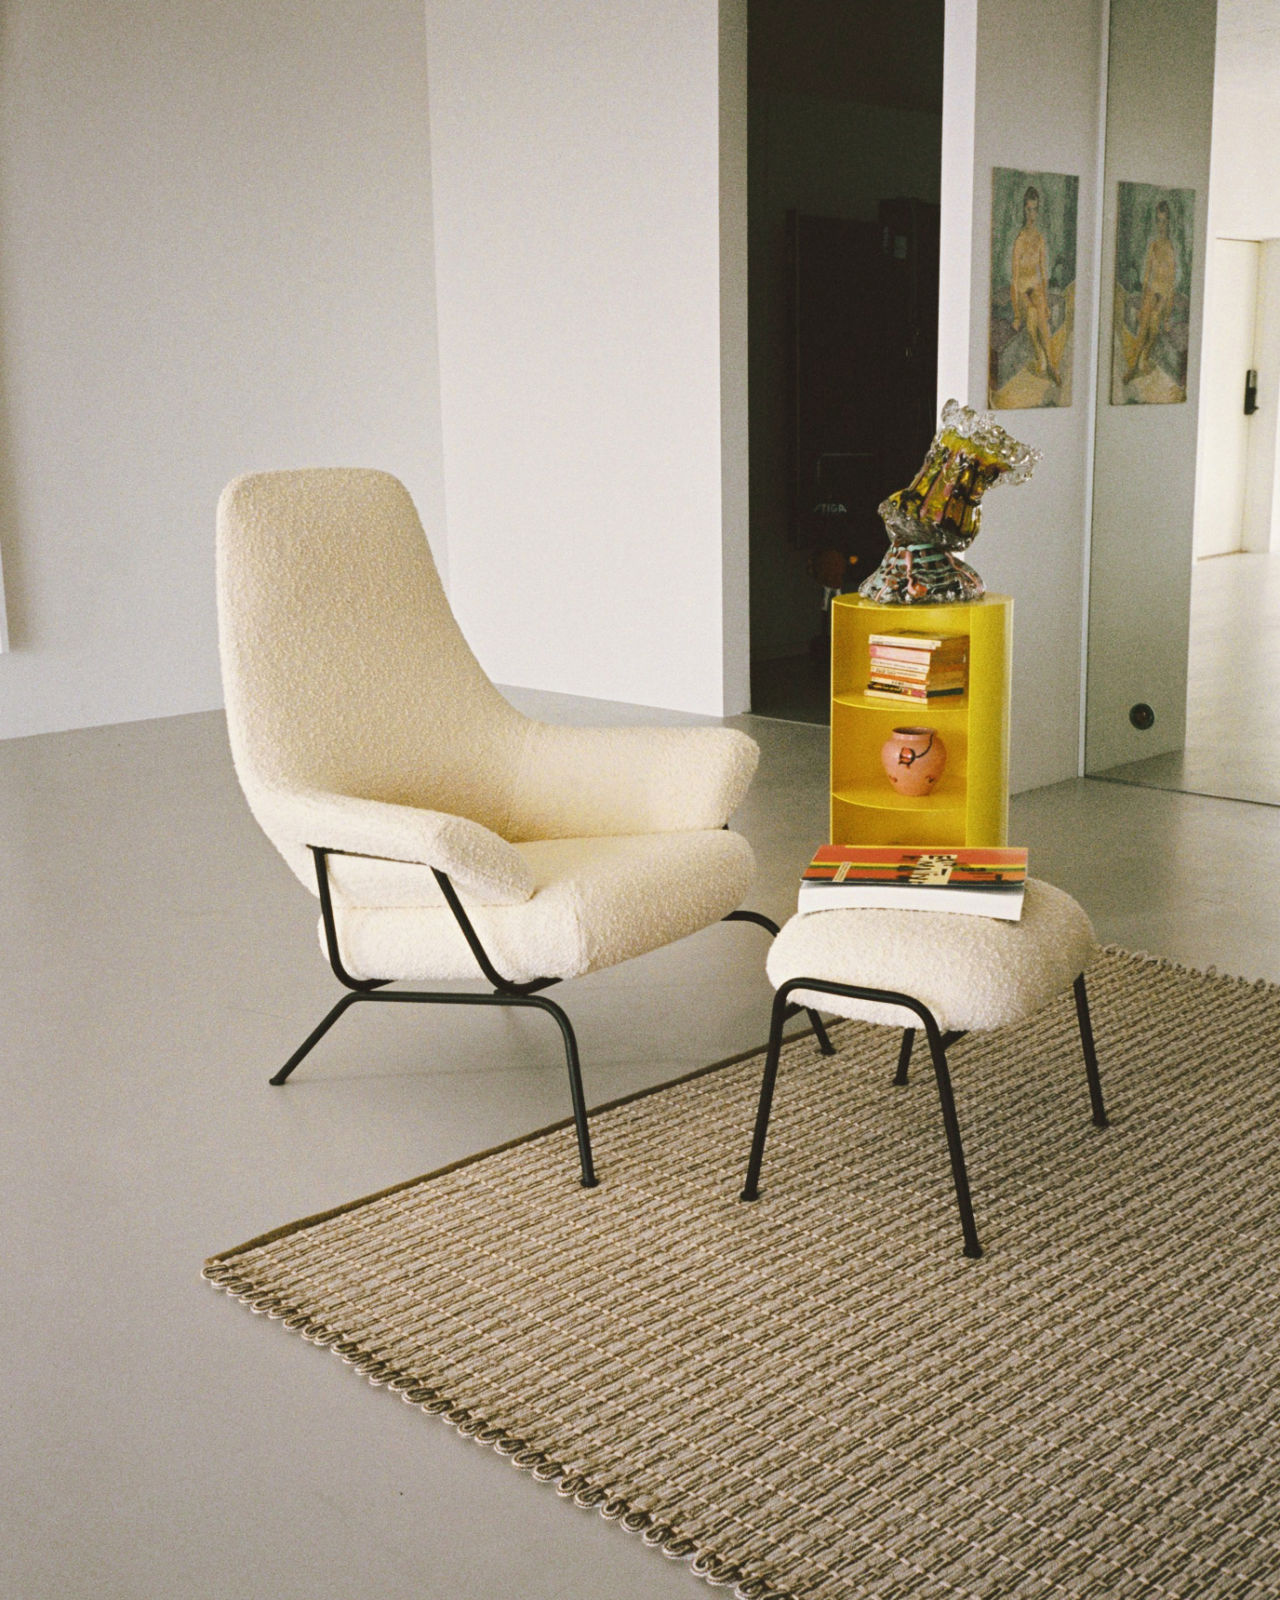 An analog image of a lounge scene featuring Hide Pedestal, Rope Rug, and Hai Lounge Chair + Ottoman.